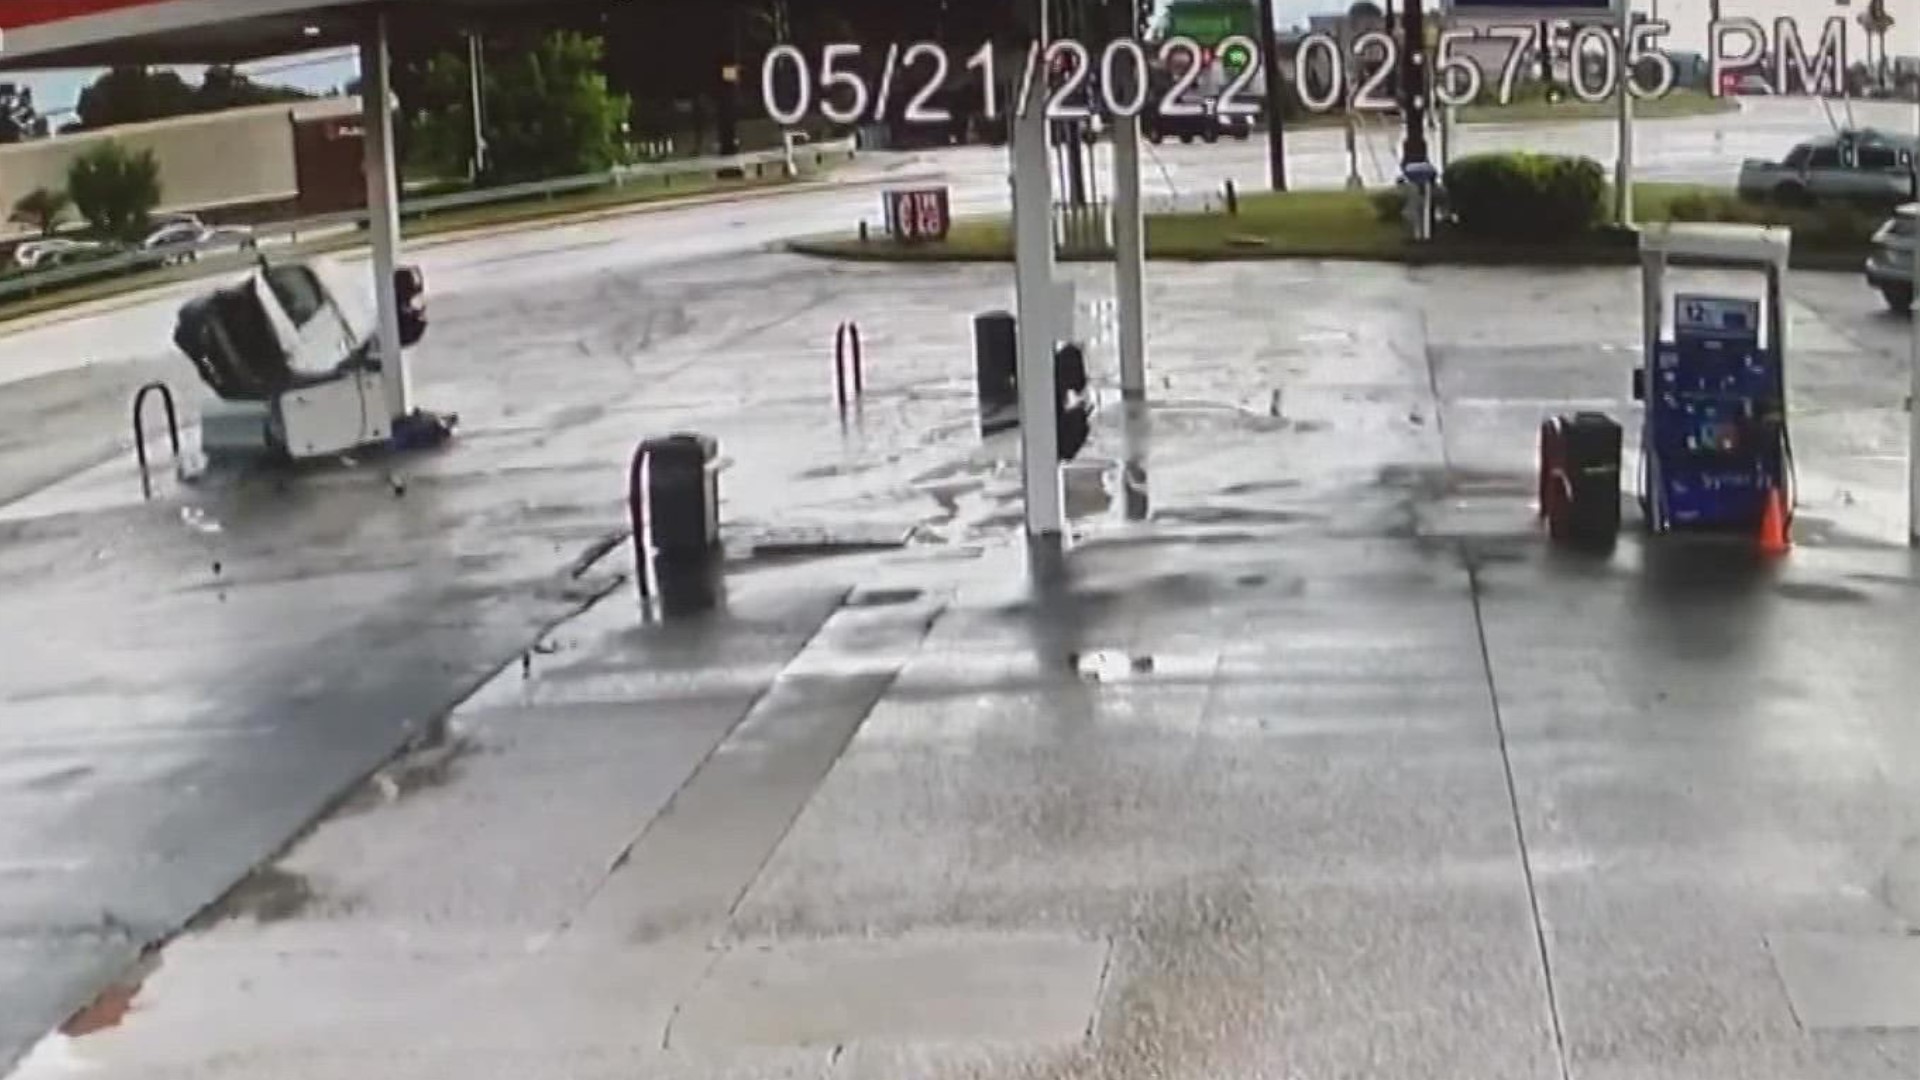 Exxon on Charleston Highway in Cayce has no more pumps after cars continue to crash into the business.